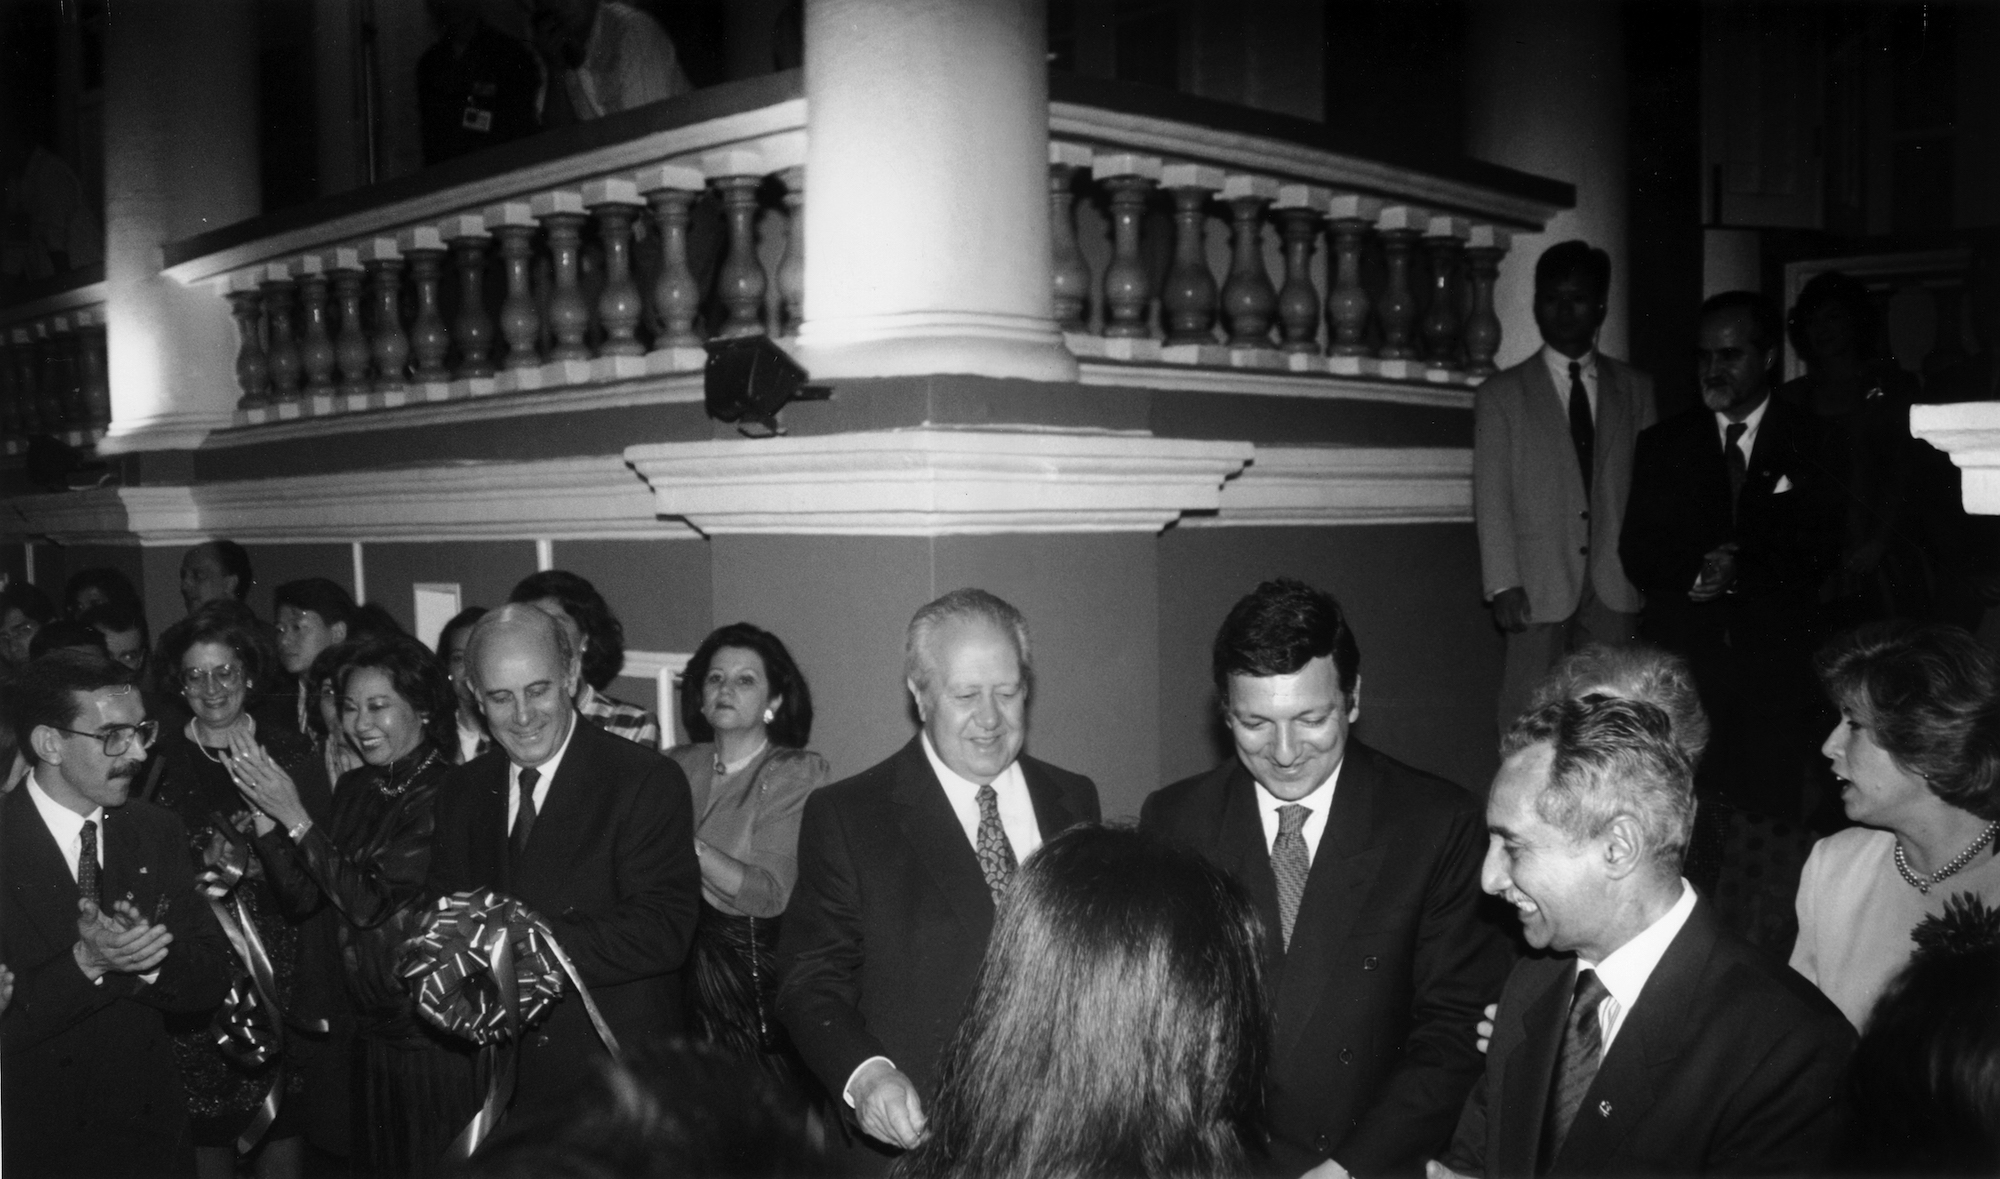 General Vasco Rocha Vieira, Dr Mário Soares and Dr Durão Barroso at the club’s inauguration in 1995 - Photo Courtesy of the Military Club